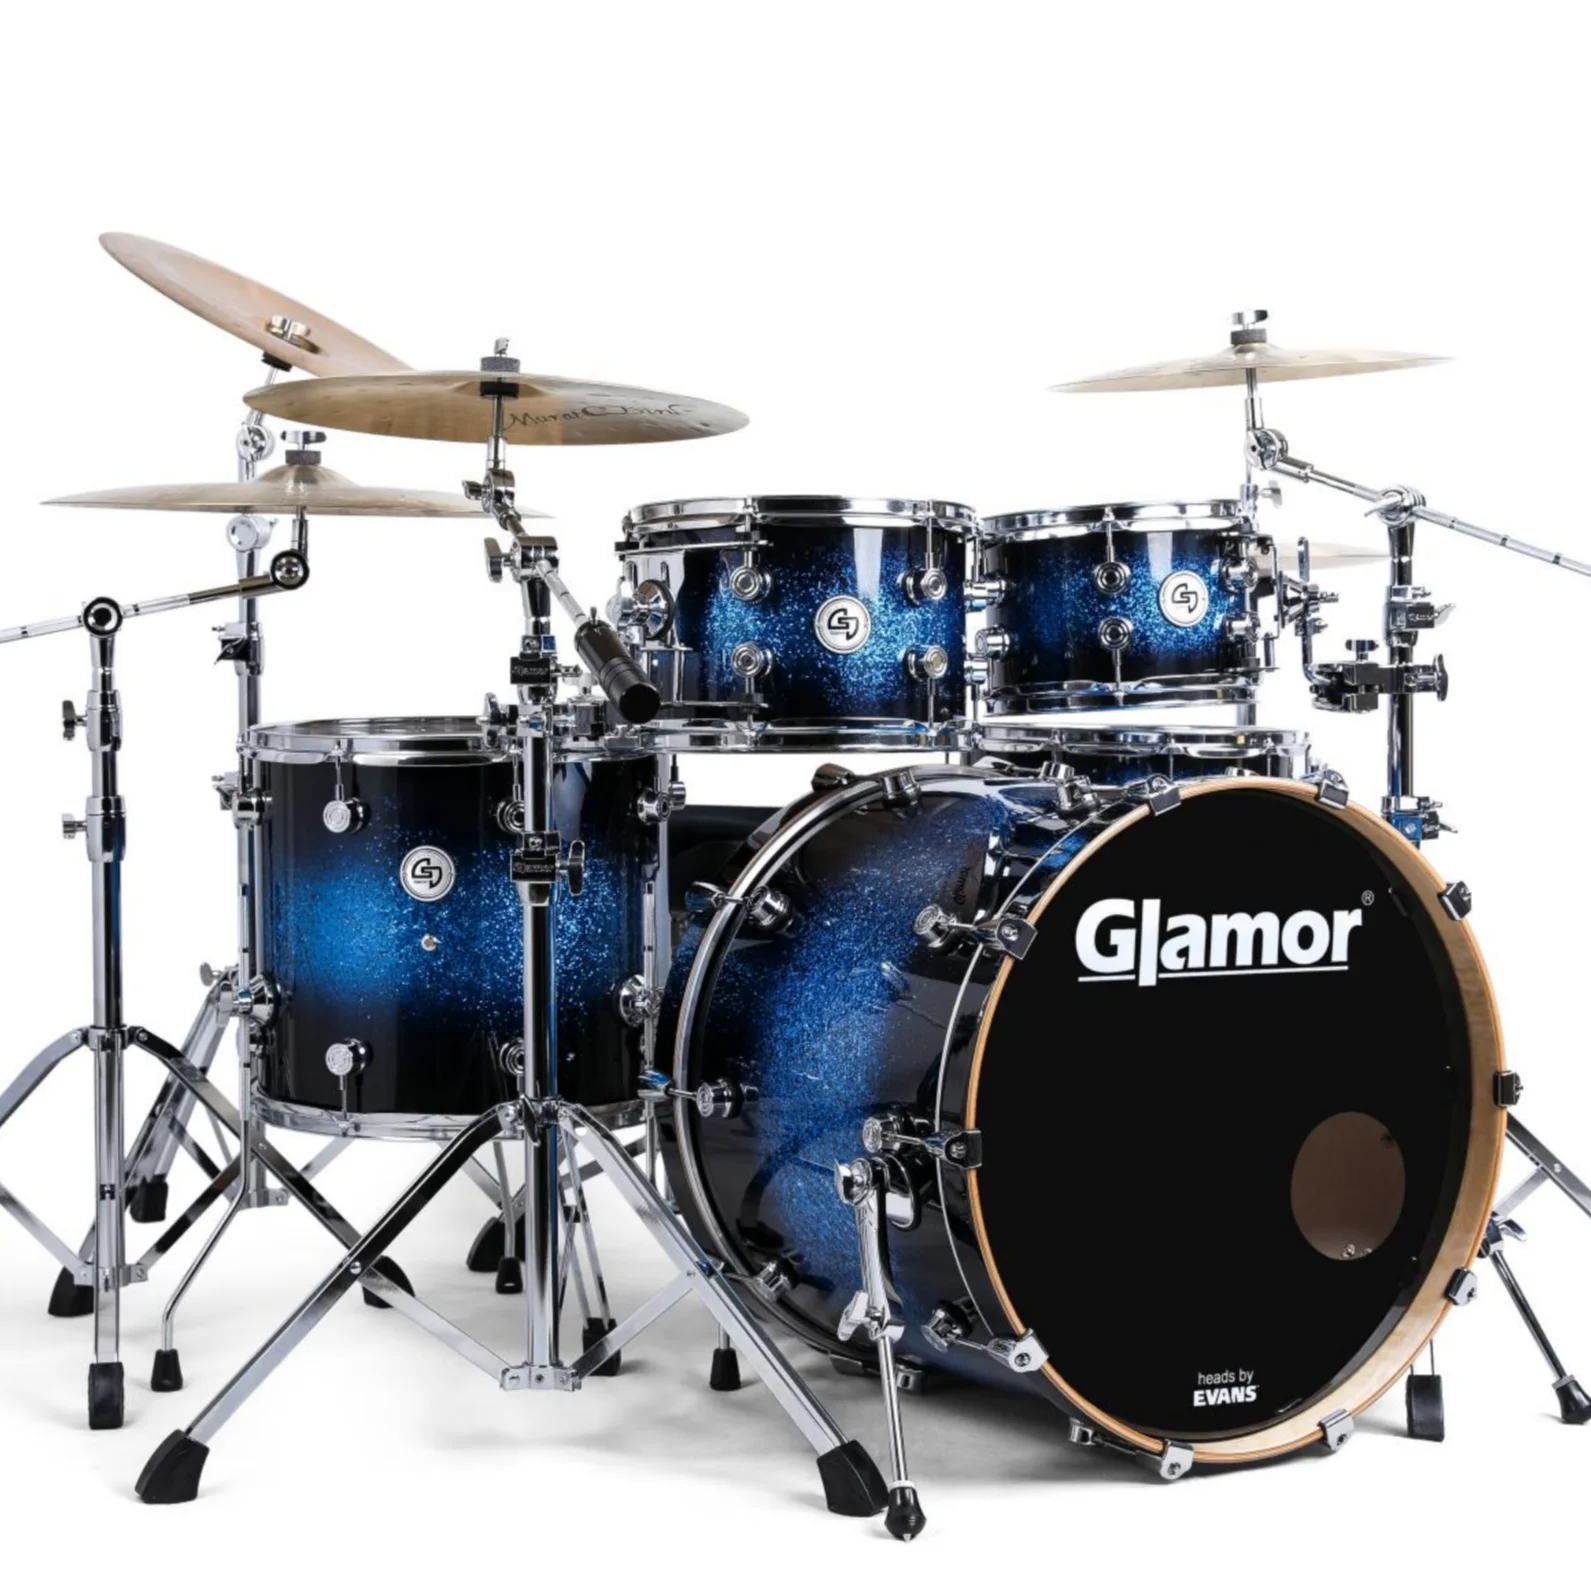 Drum Sets Glamor Drum Professional Musical Instrument K5 Knight Series High Quality  Portable Drum kits (1600616291671)